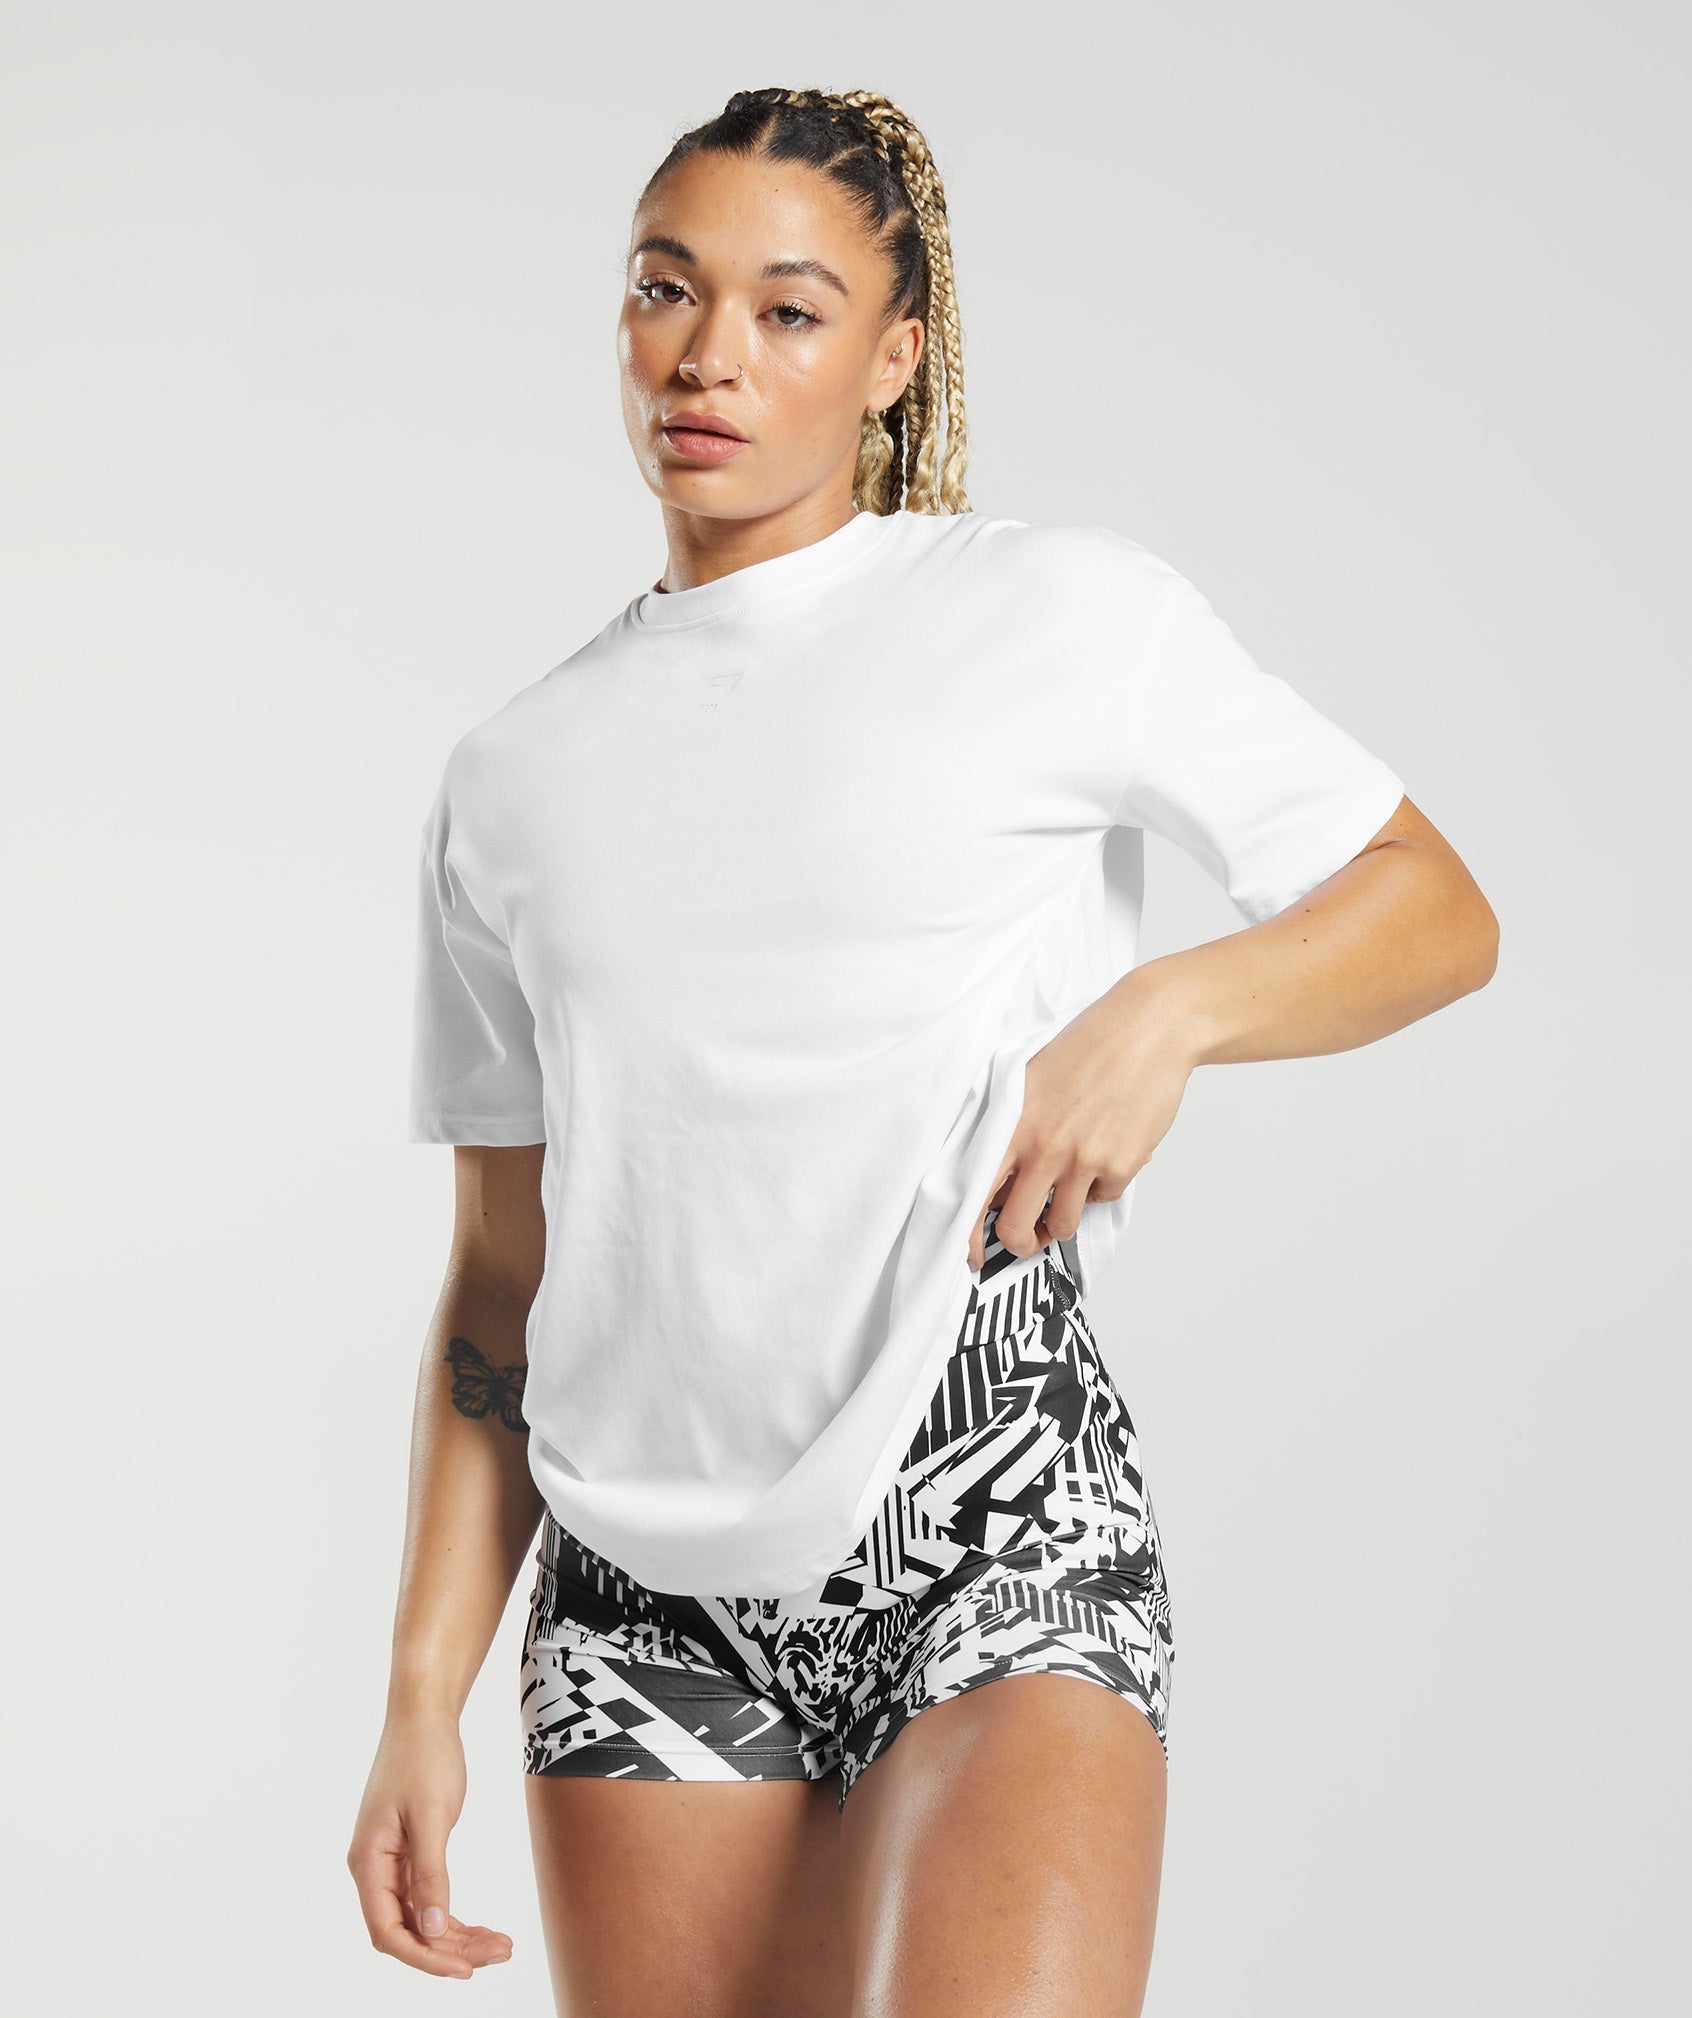 GS Power Oversized T-Shirt in White - view 2